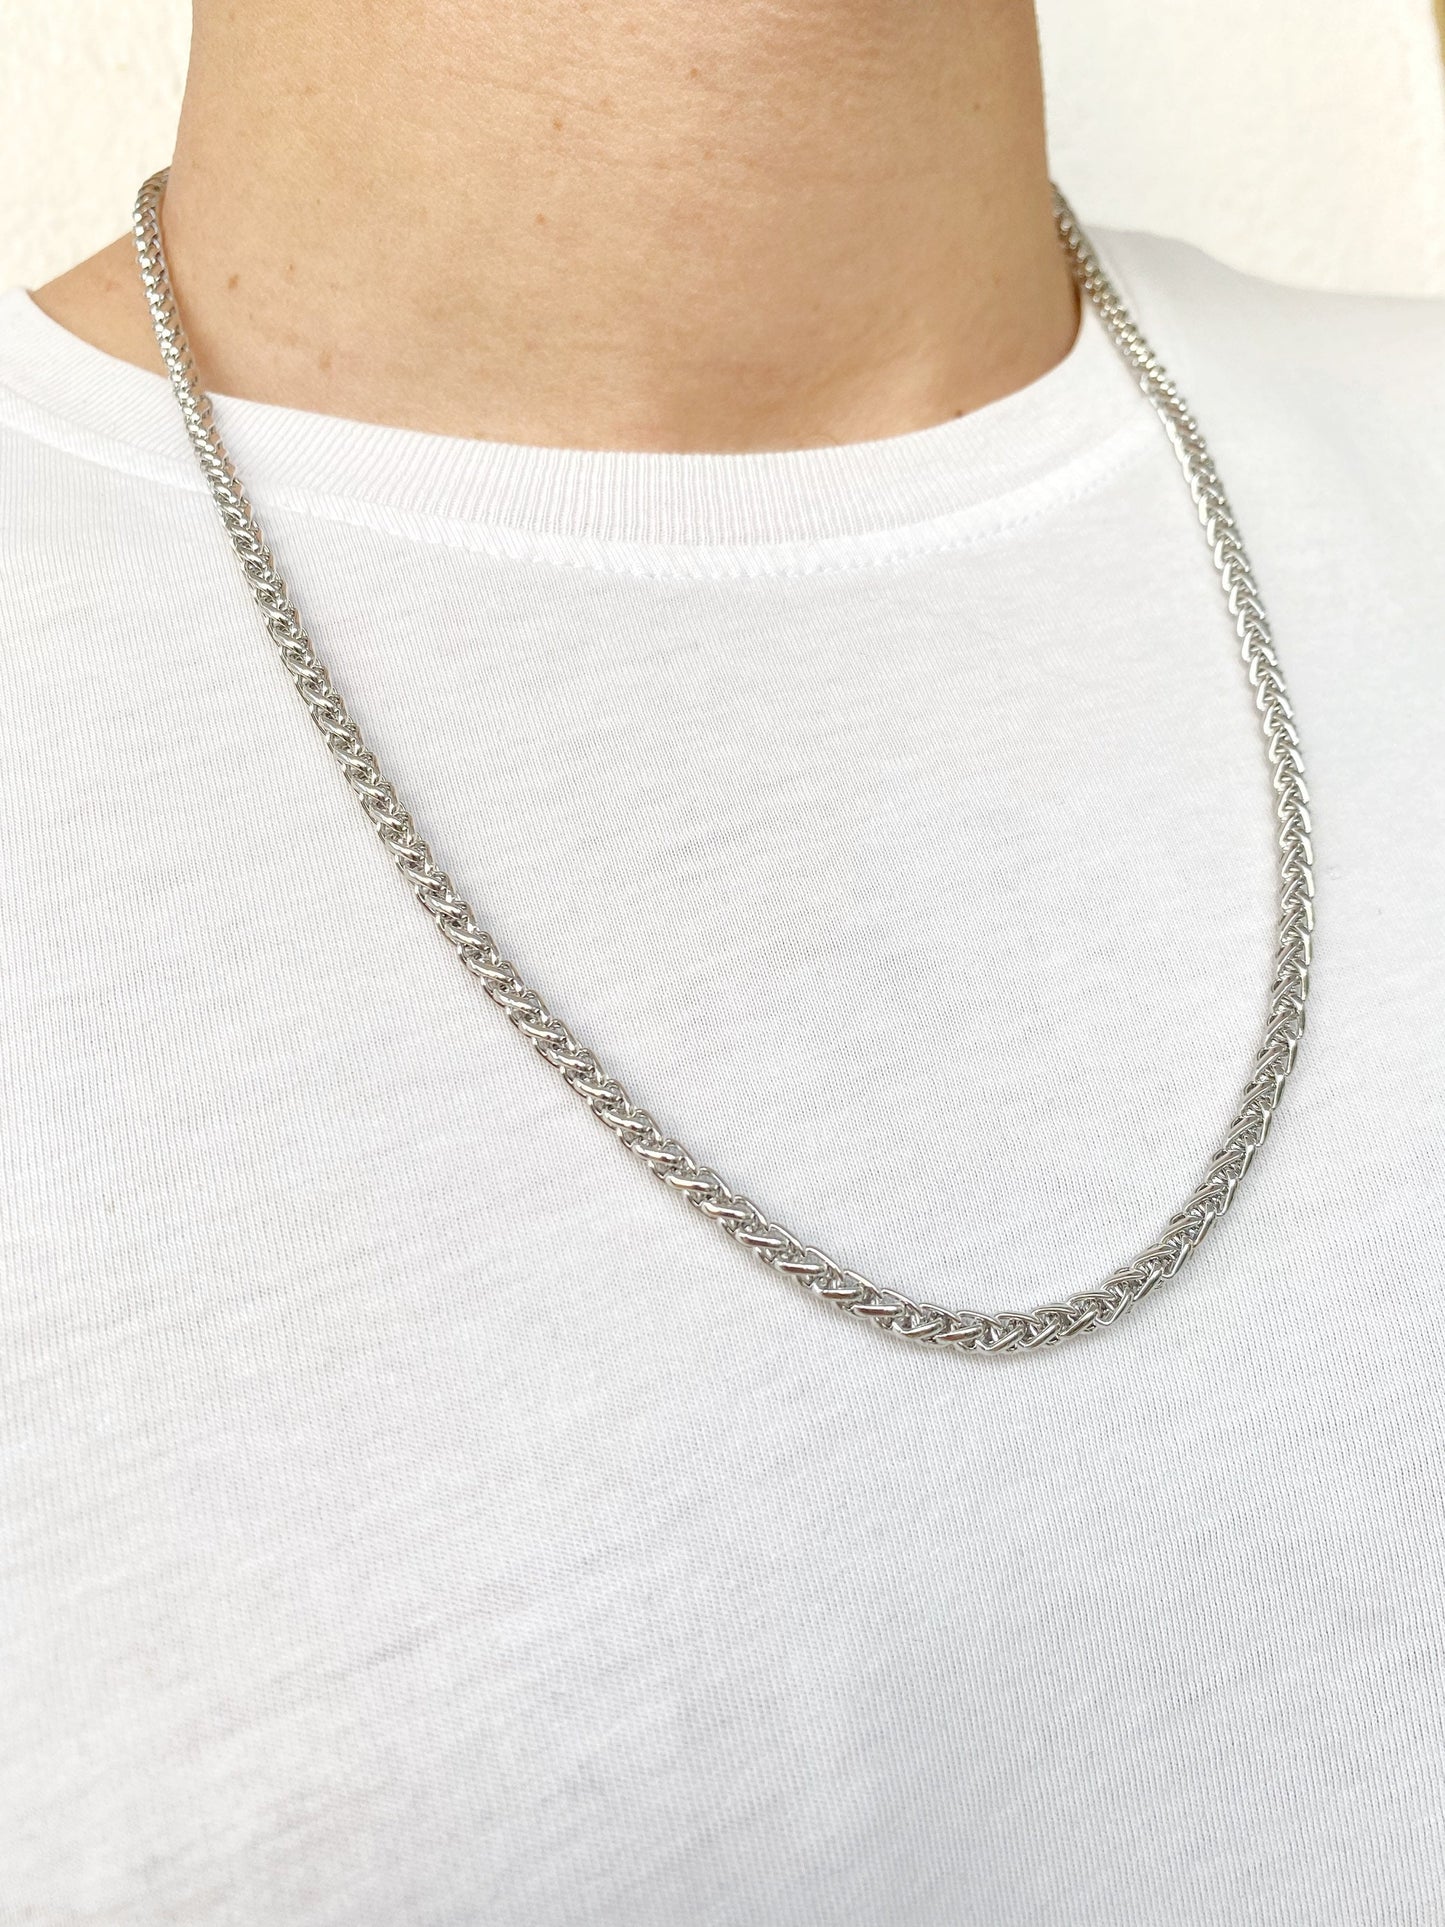 Unisex Silver Curb Rope Chain Necklace • Dangling Twisted Chain